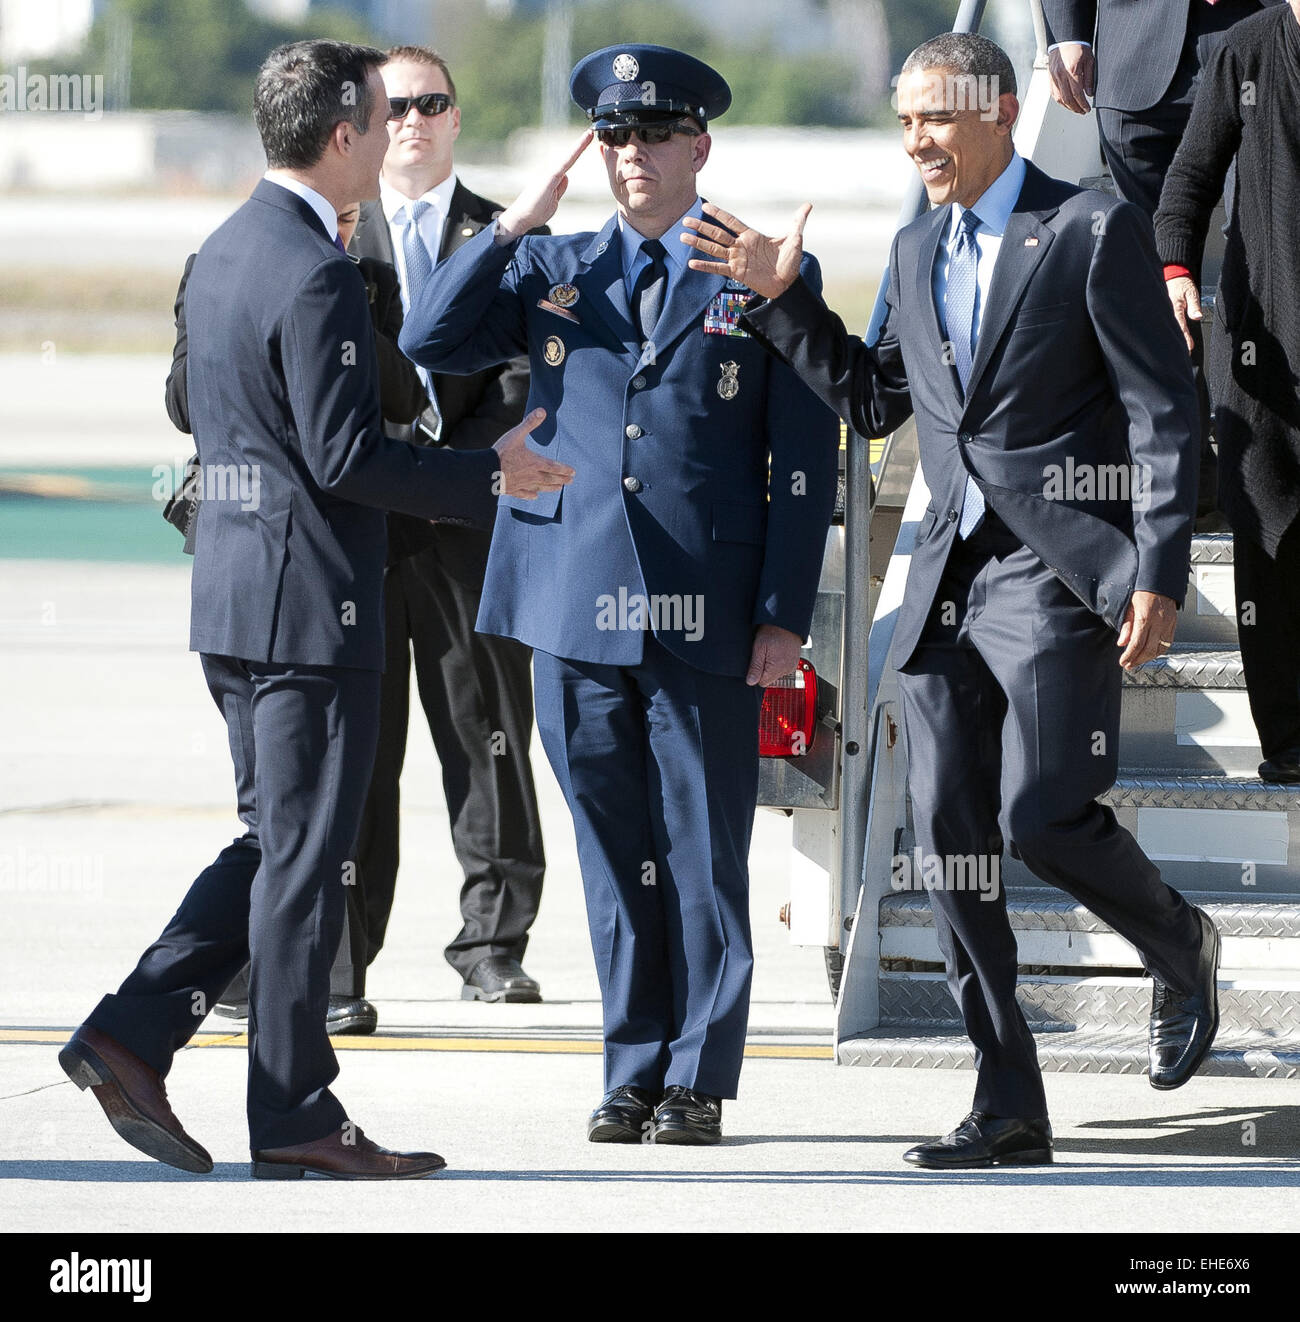 Los Angeles, California, USA. 12th Mar, 2015. President Barack Obama, accompanied by US Senator Barbara Boxer and US Congressman Ted Leiu, arrived aboard Air Force One just after 4 p.m. on Thursday afternoon. Obama descended the stairs and was greeted by Los Angeles Mayor Eric Garcetti with a handshake and a hug. After saying good bye to Boxer and Leiu, Garcetti walked with Obama to board Marine One en route to Burbank Airport where the president would continue on for a planned appearance on the Jimmy Kimmel Live! show in Hollywood. Credit:  David Bro/ZUMA Wire/Alamy Live News Stock Photo